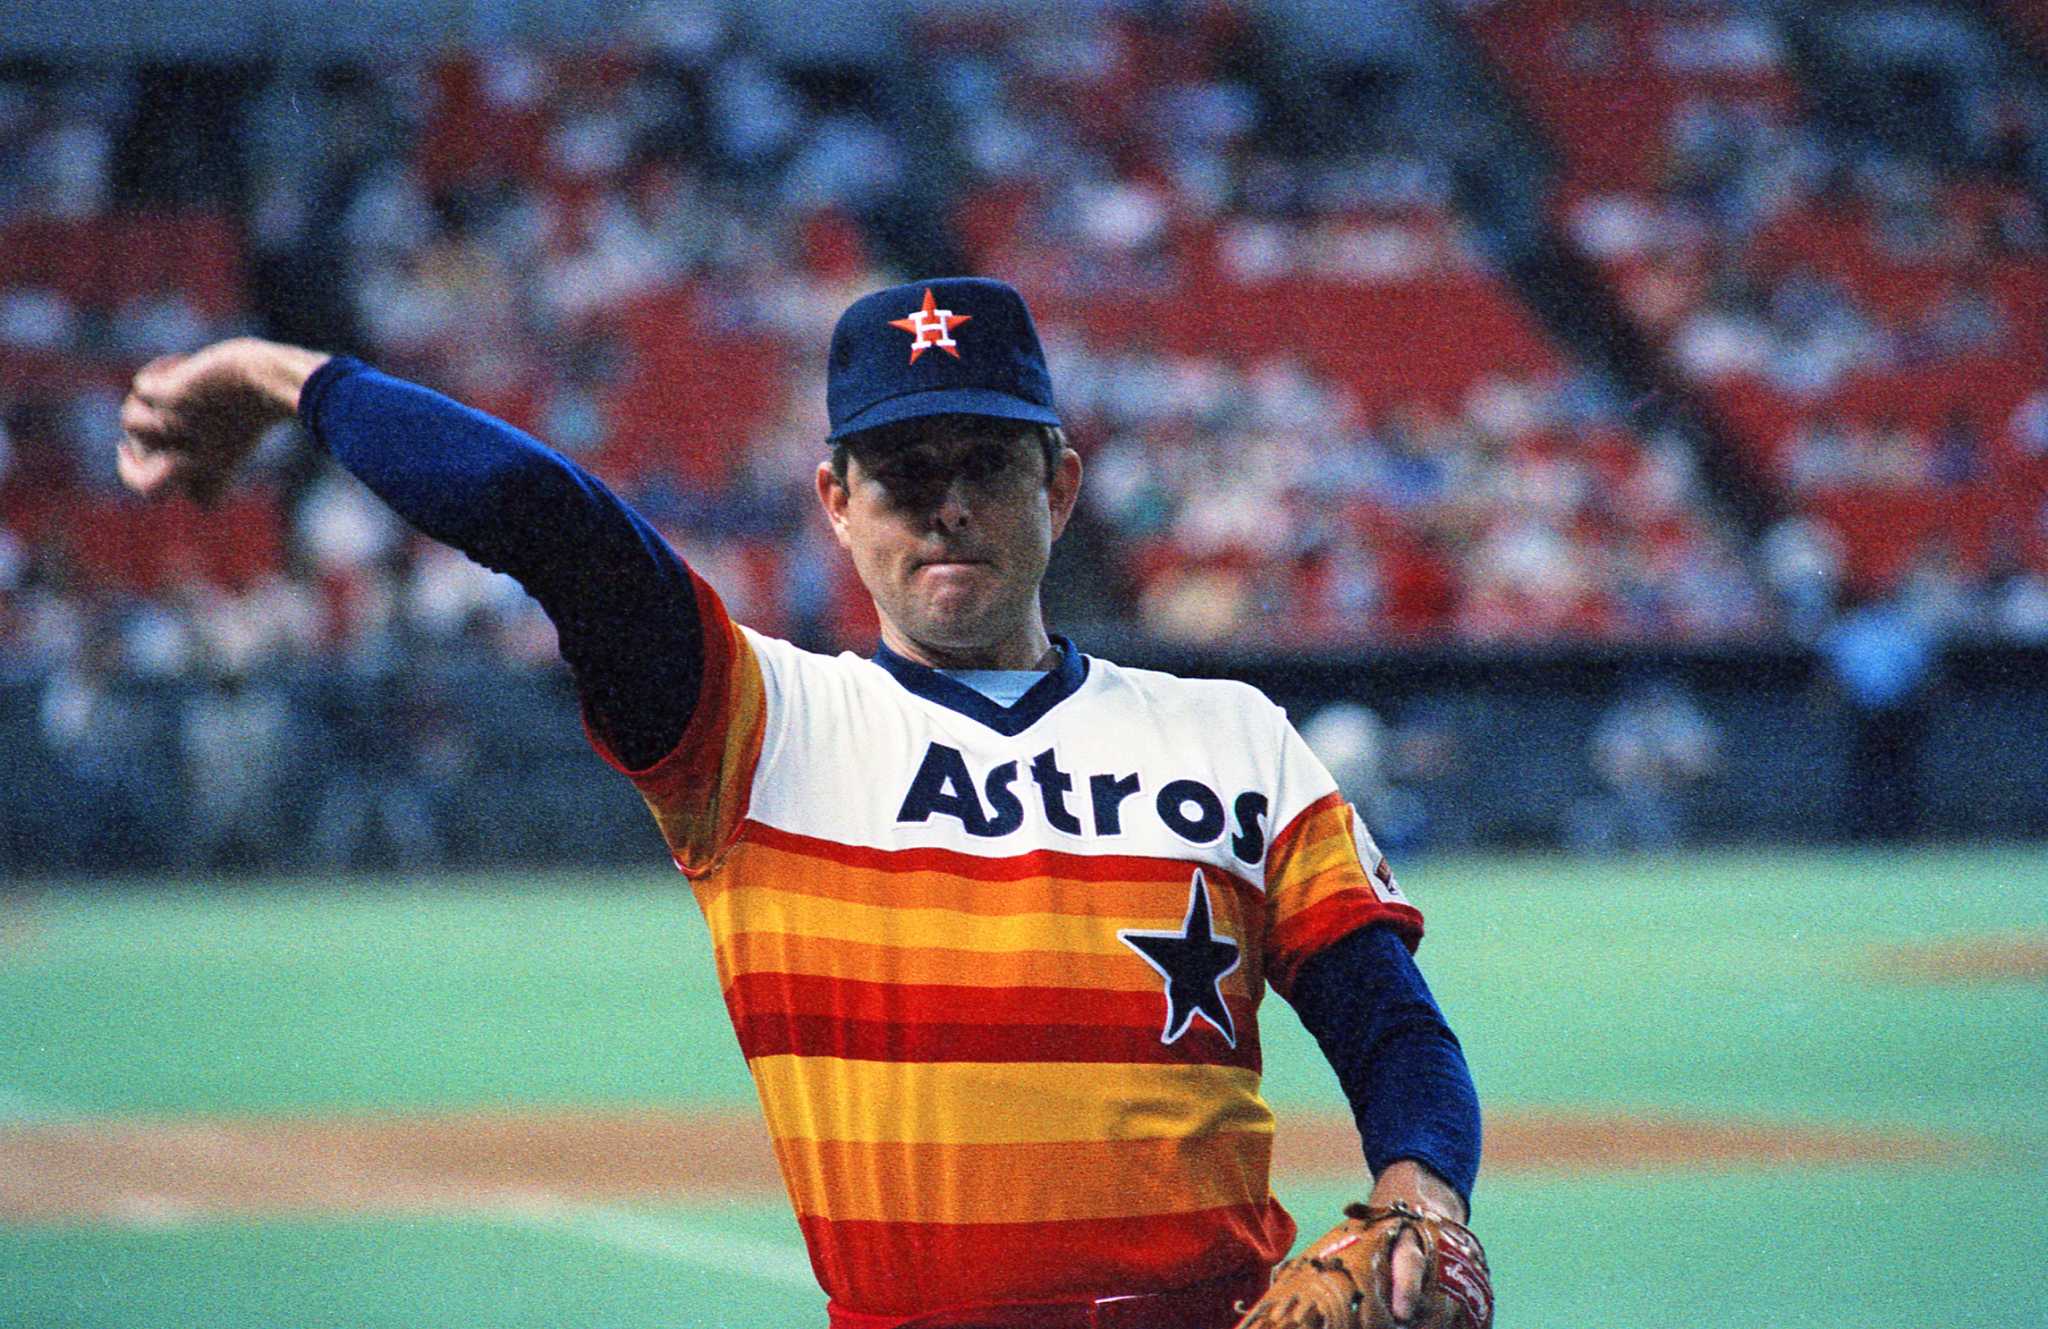 Why did Nolan Ryan go into the Hall of Fame as a Texas Ranger instead of a  Houston Astro or California Angel? - Quora